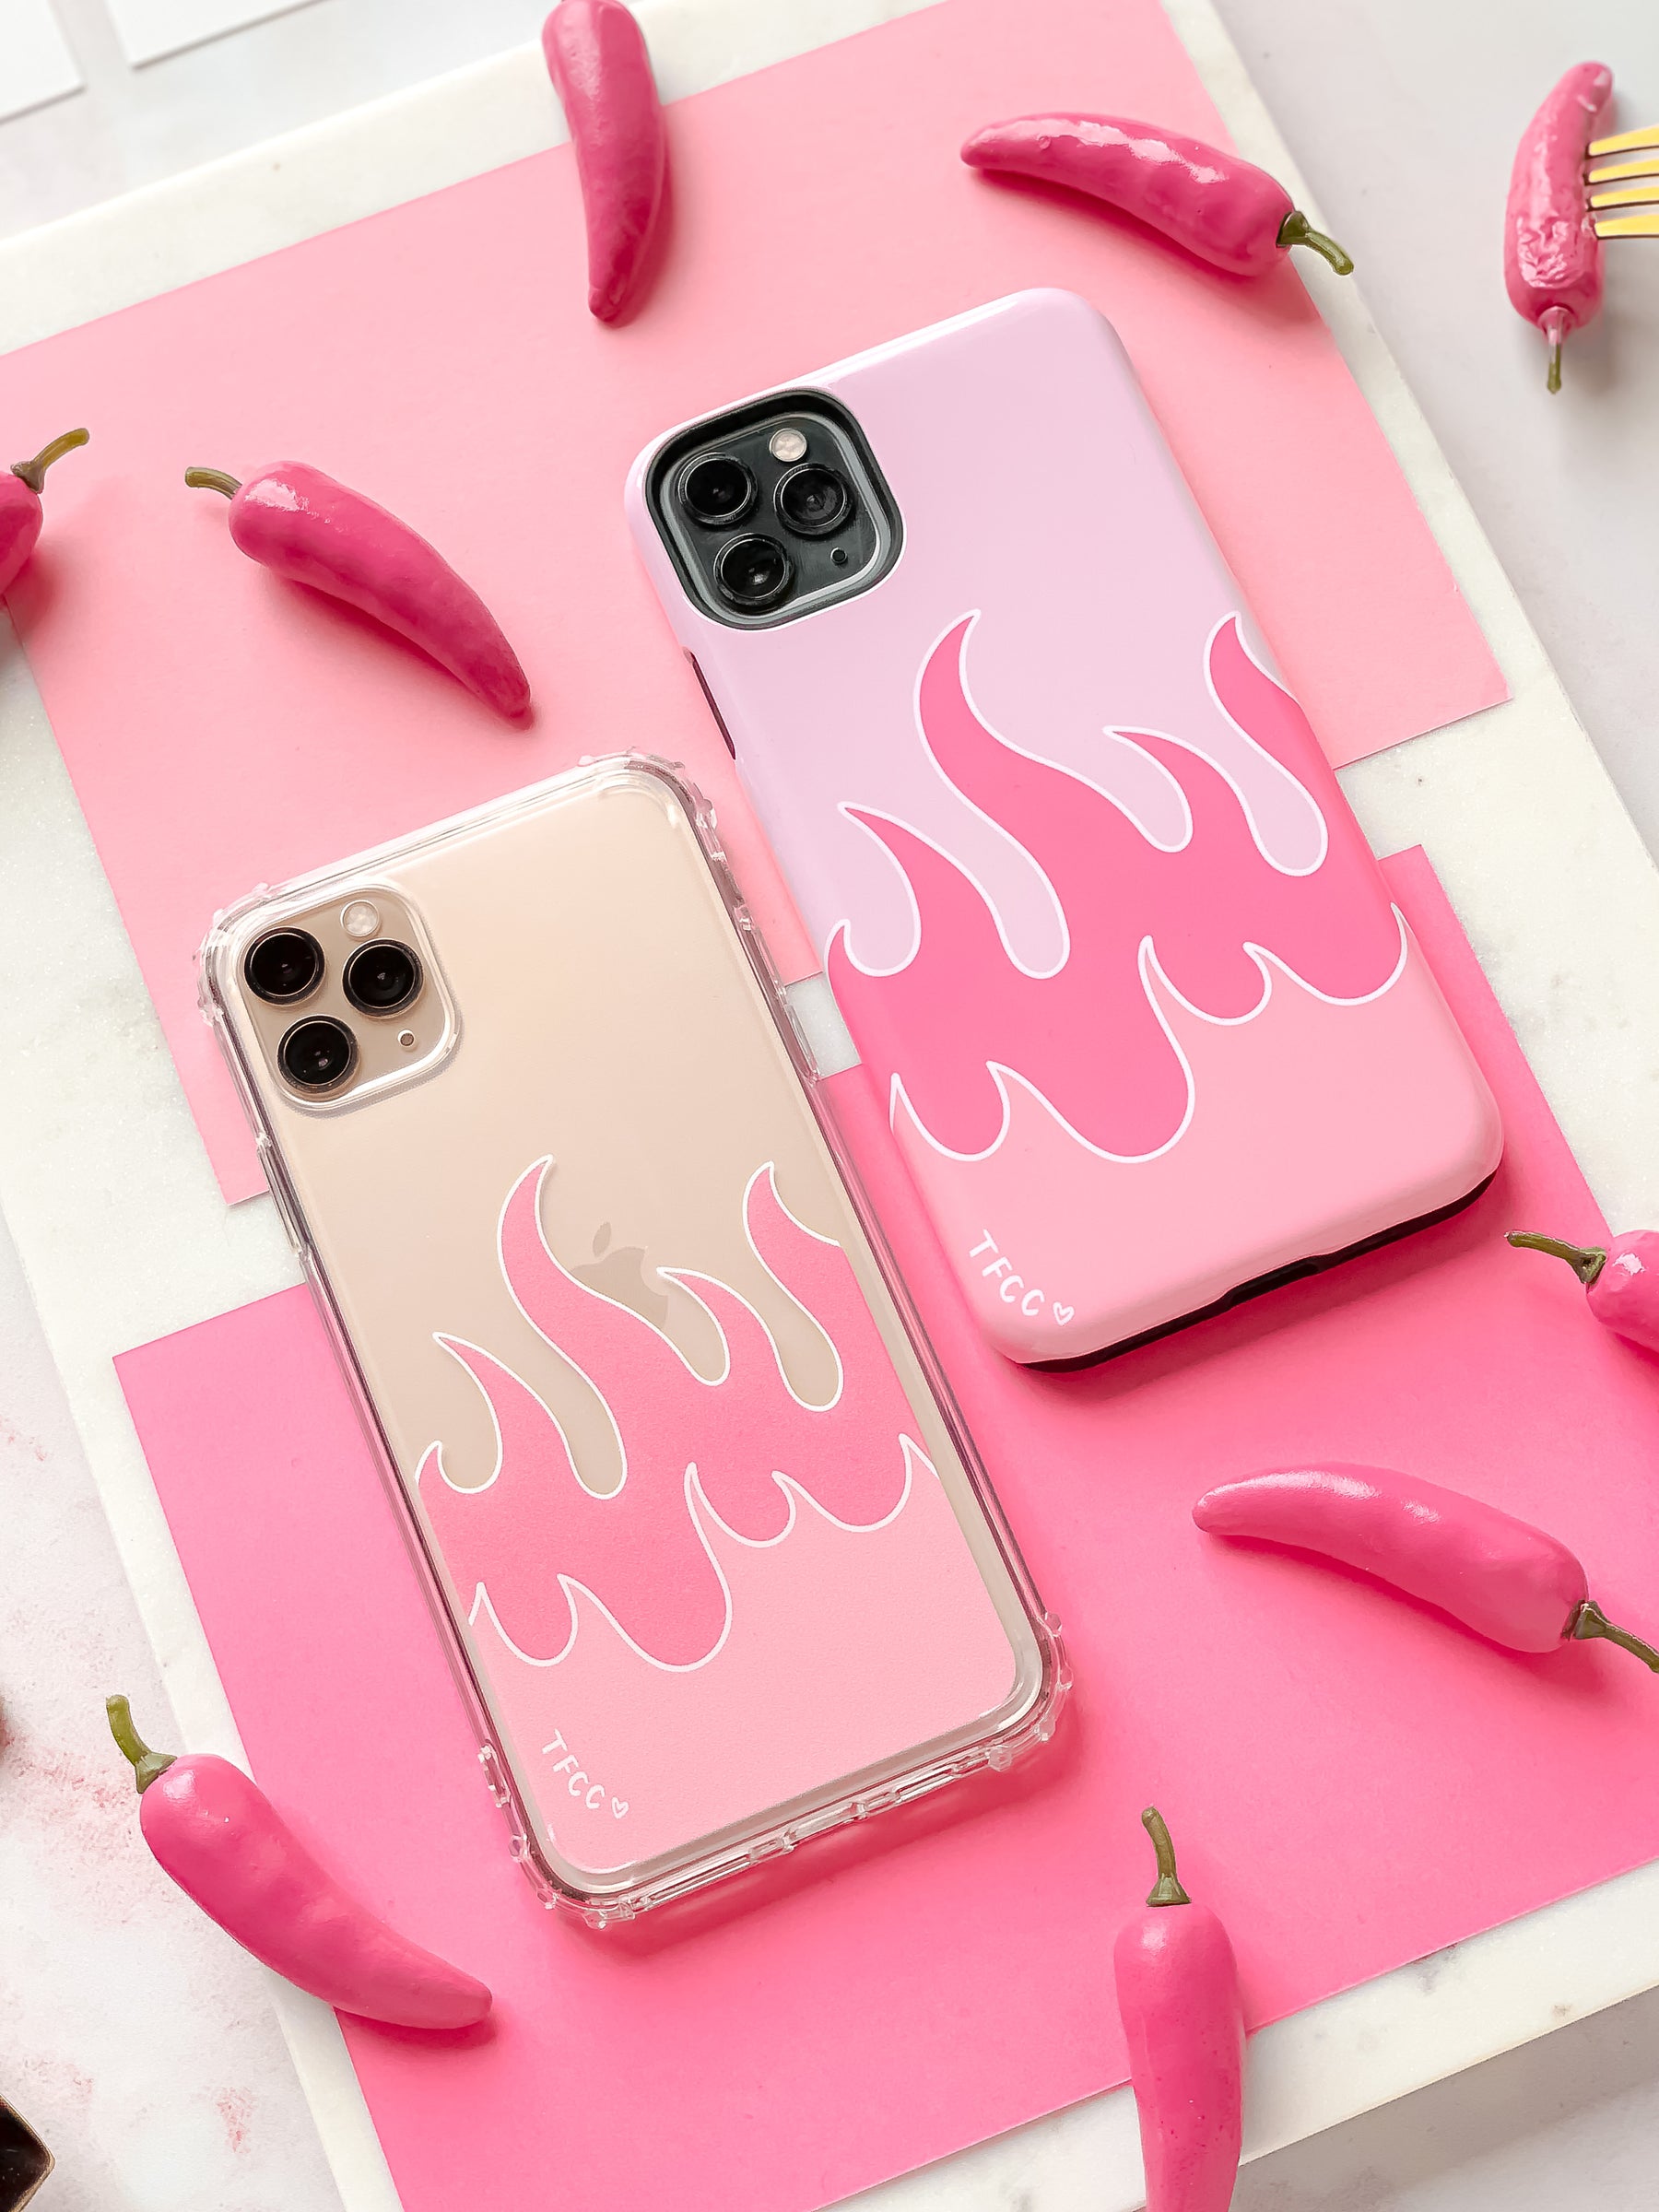 FLAMES CASE - thefonecasecompany